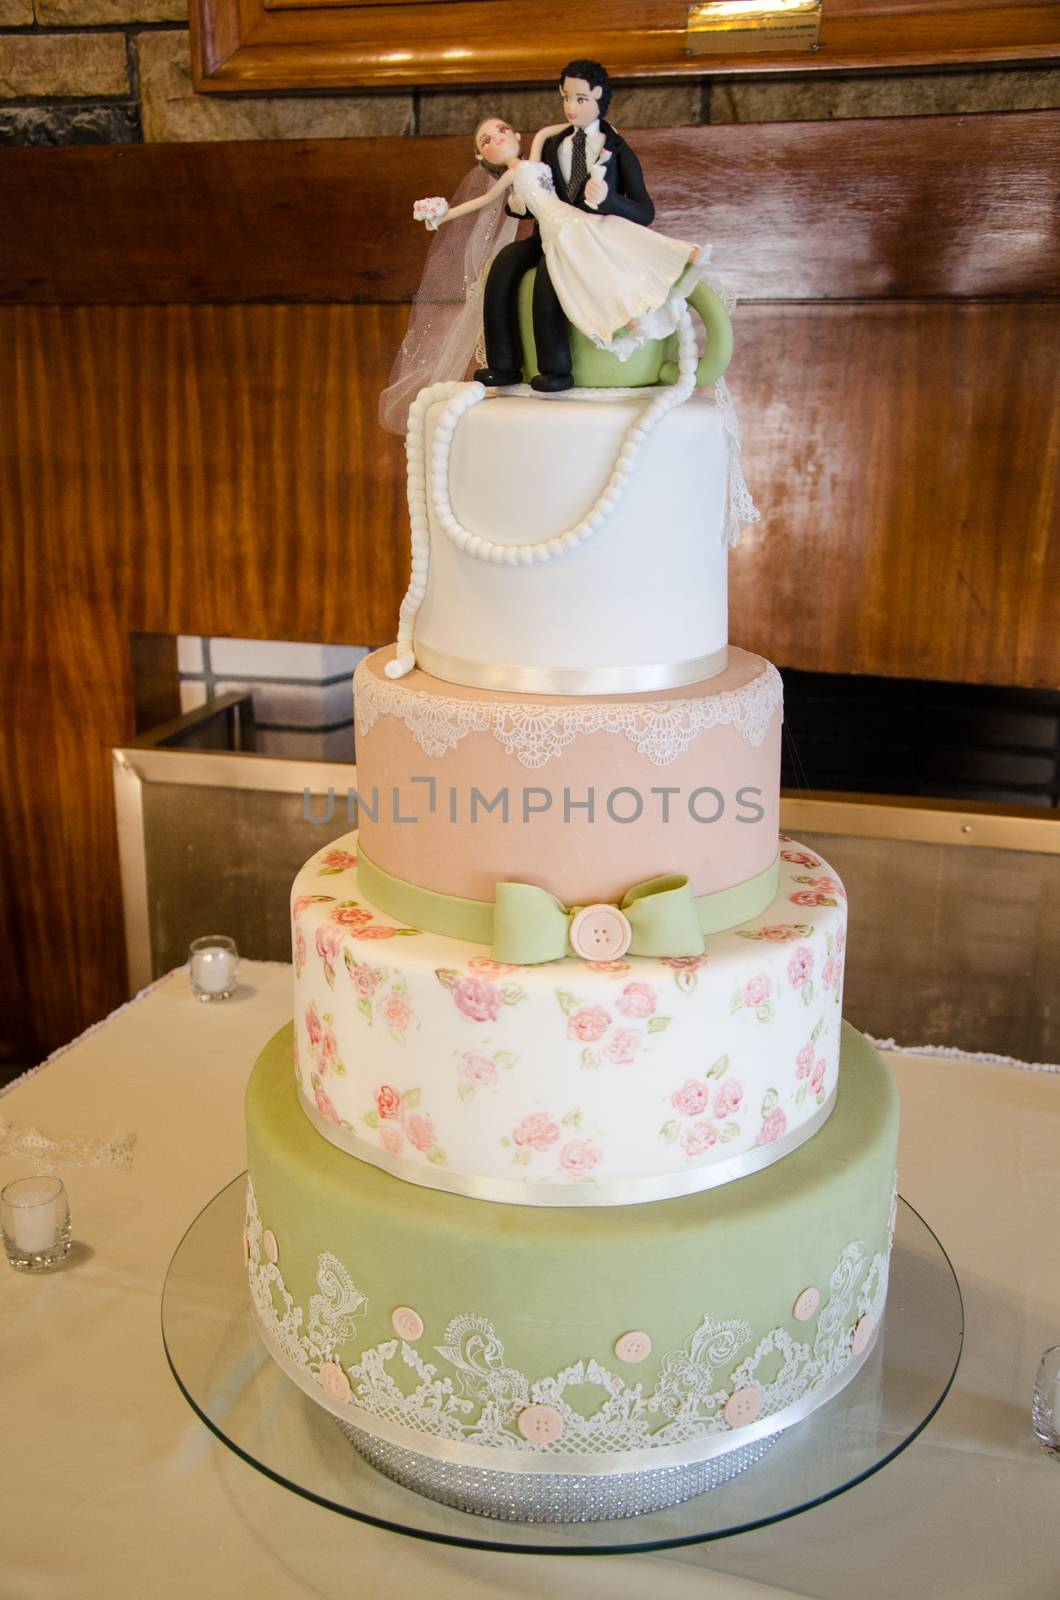 Decorating a cake at a wedding